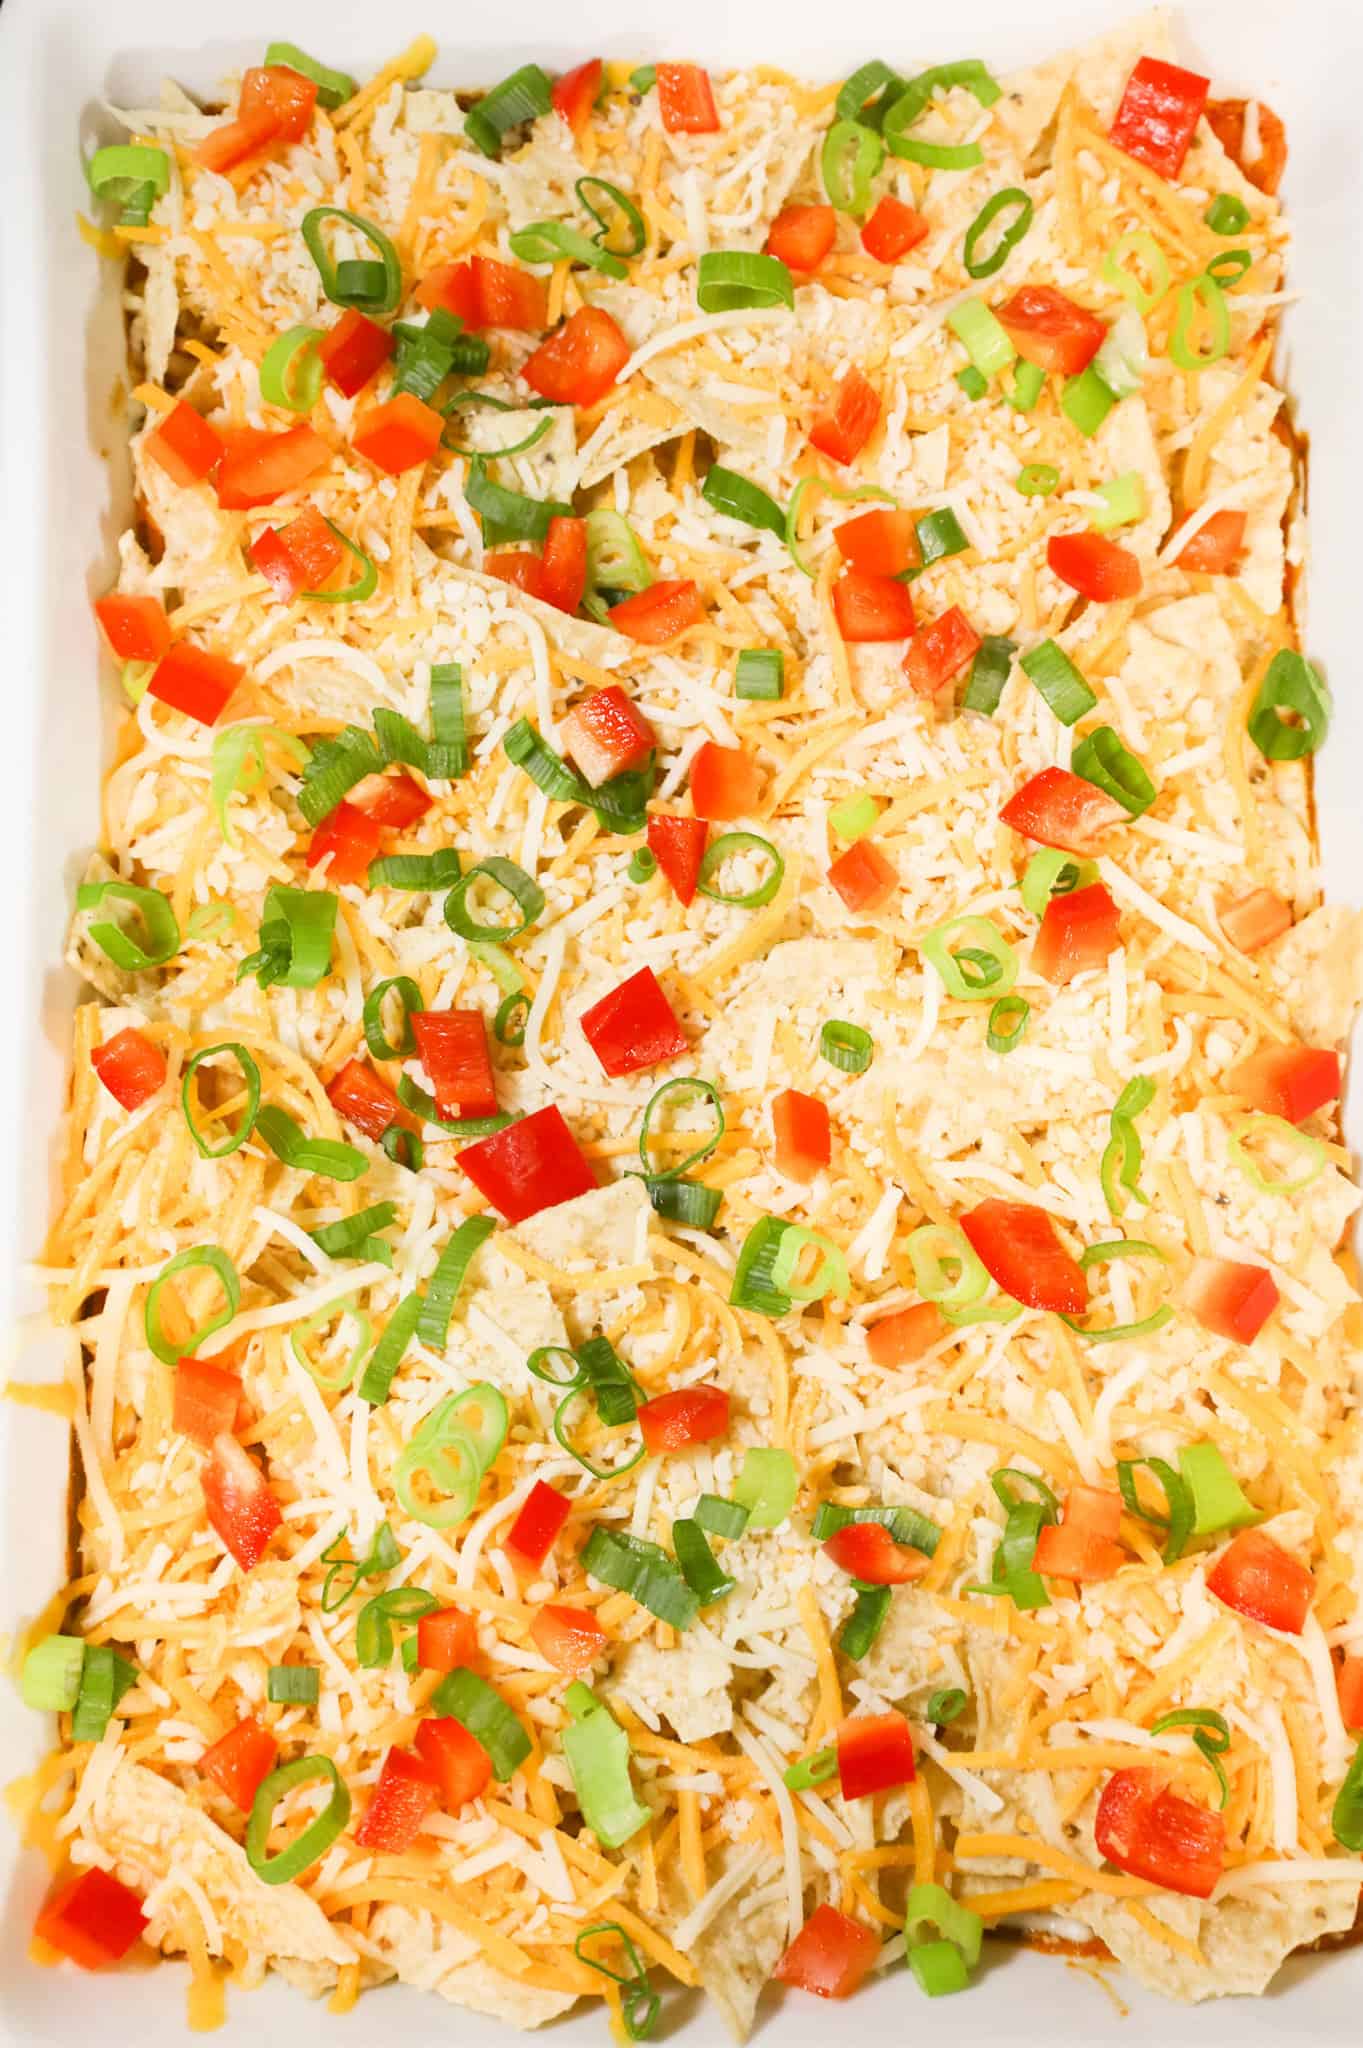 diced red peppers, chopped green onions, shredded cheese and crumbled tortilla chips on top of chicken mixture in a baking dish